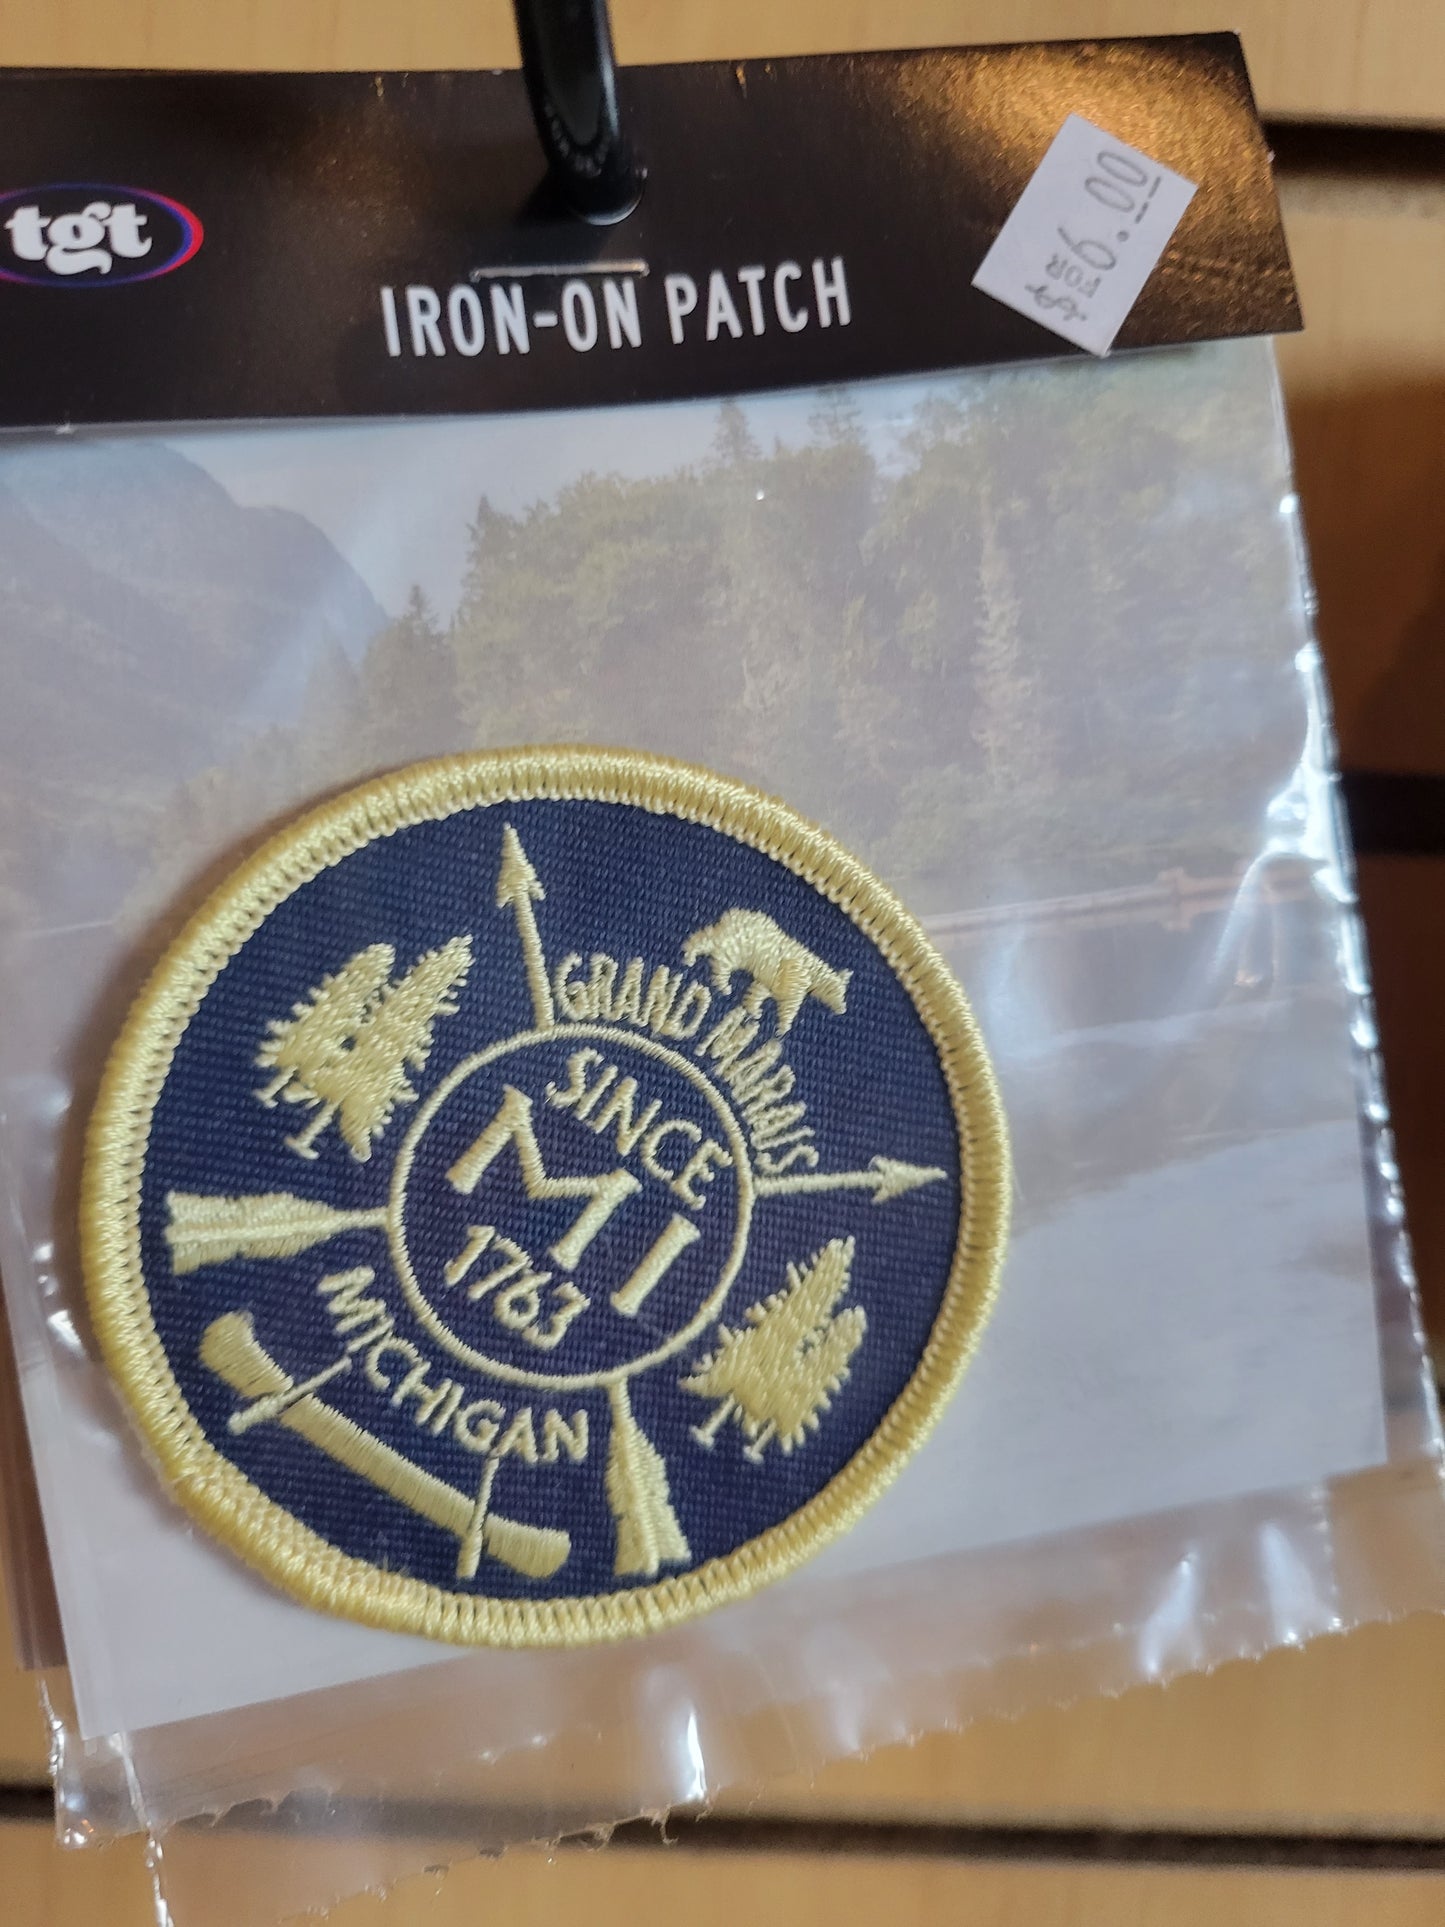 Embroidered patches Grand Marais